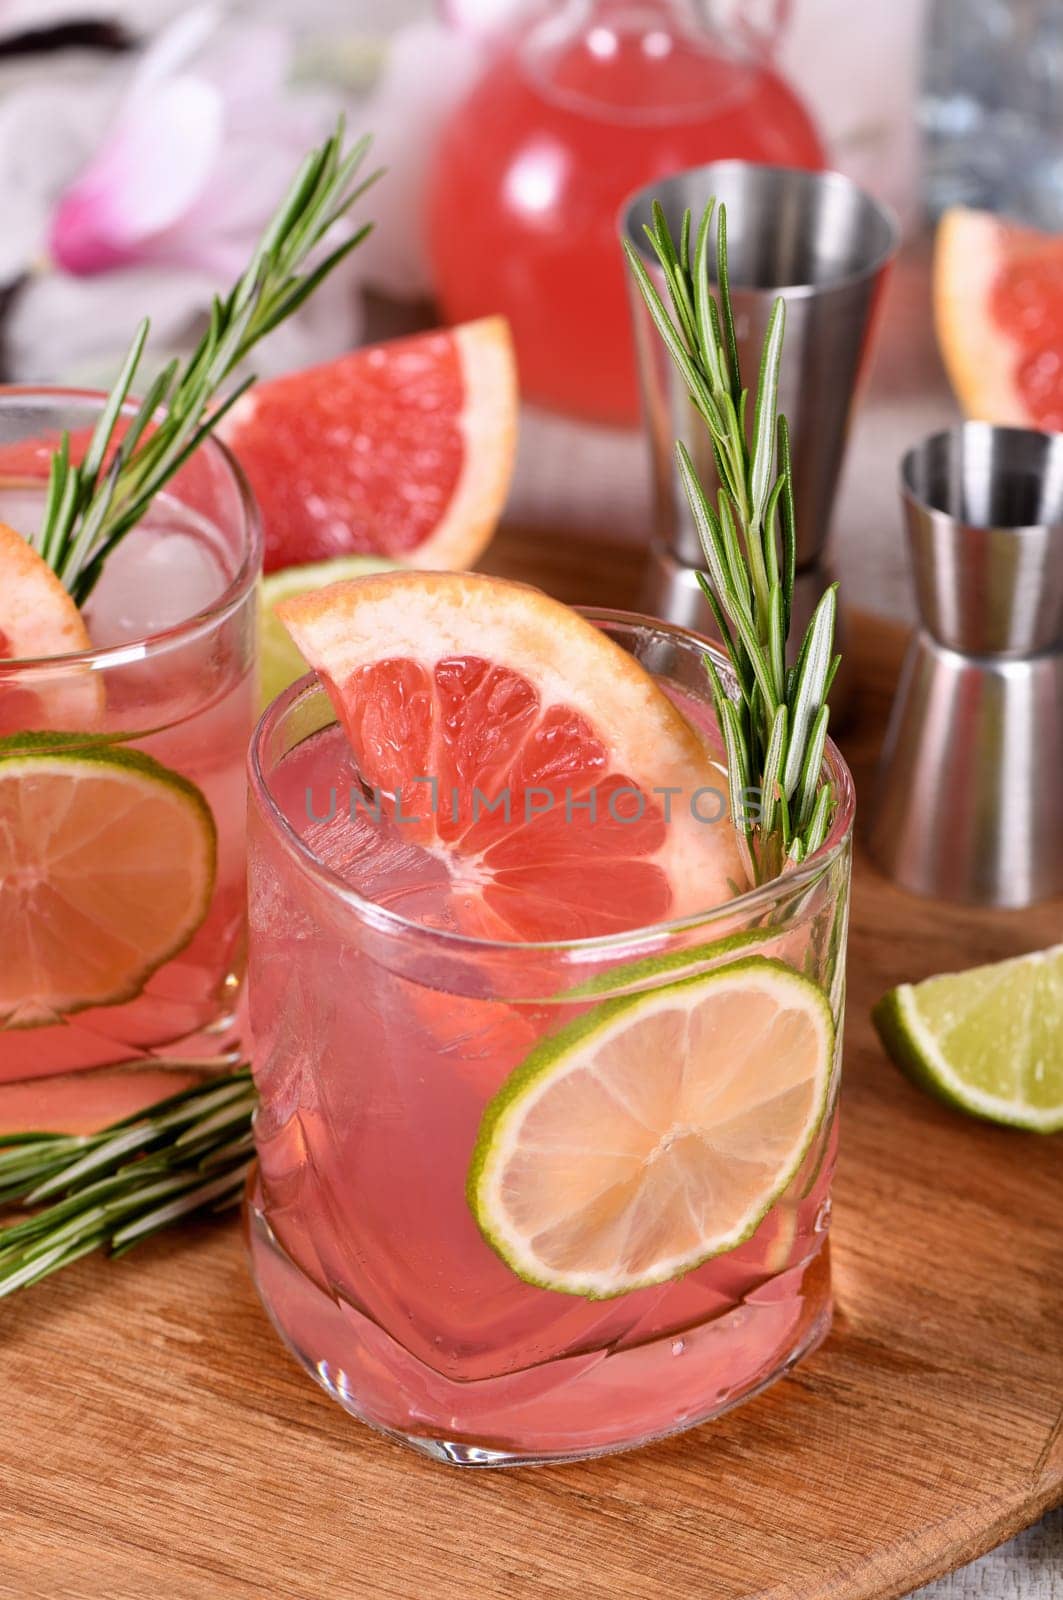 Refreshing organic cocktail with grapefruit slice, lime and rosemary sprig in a glass